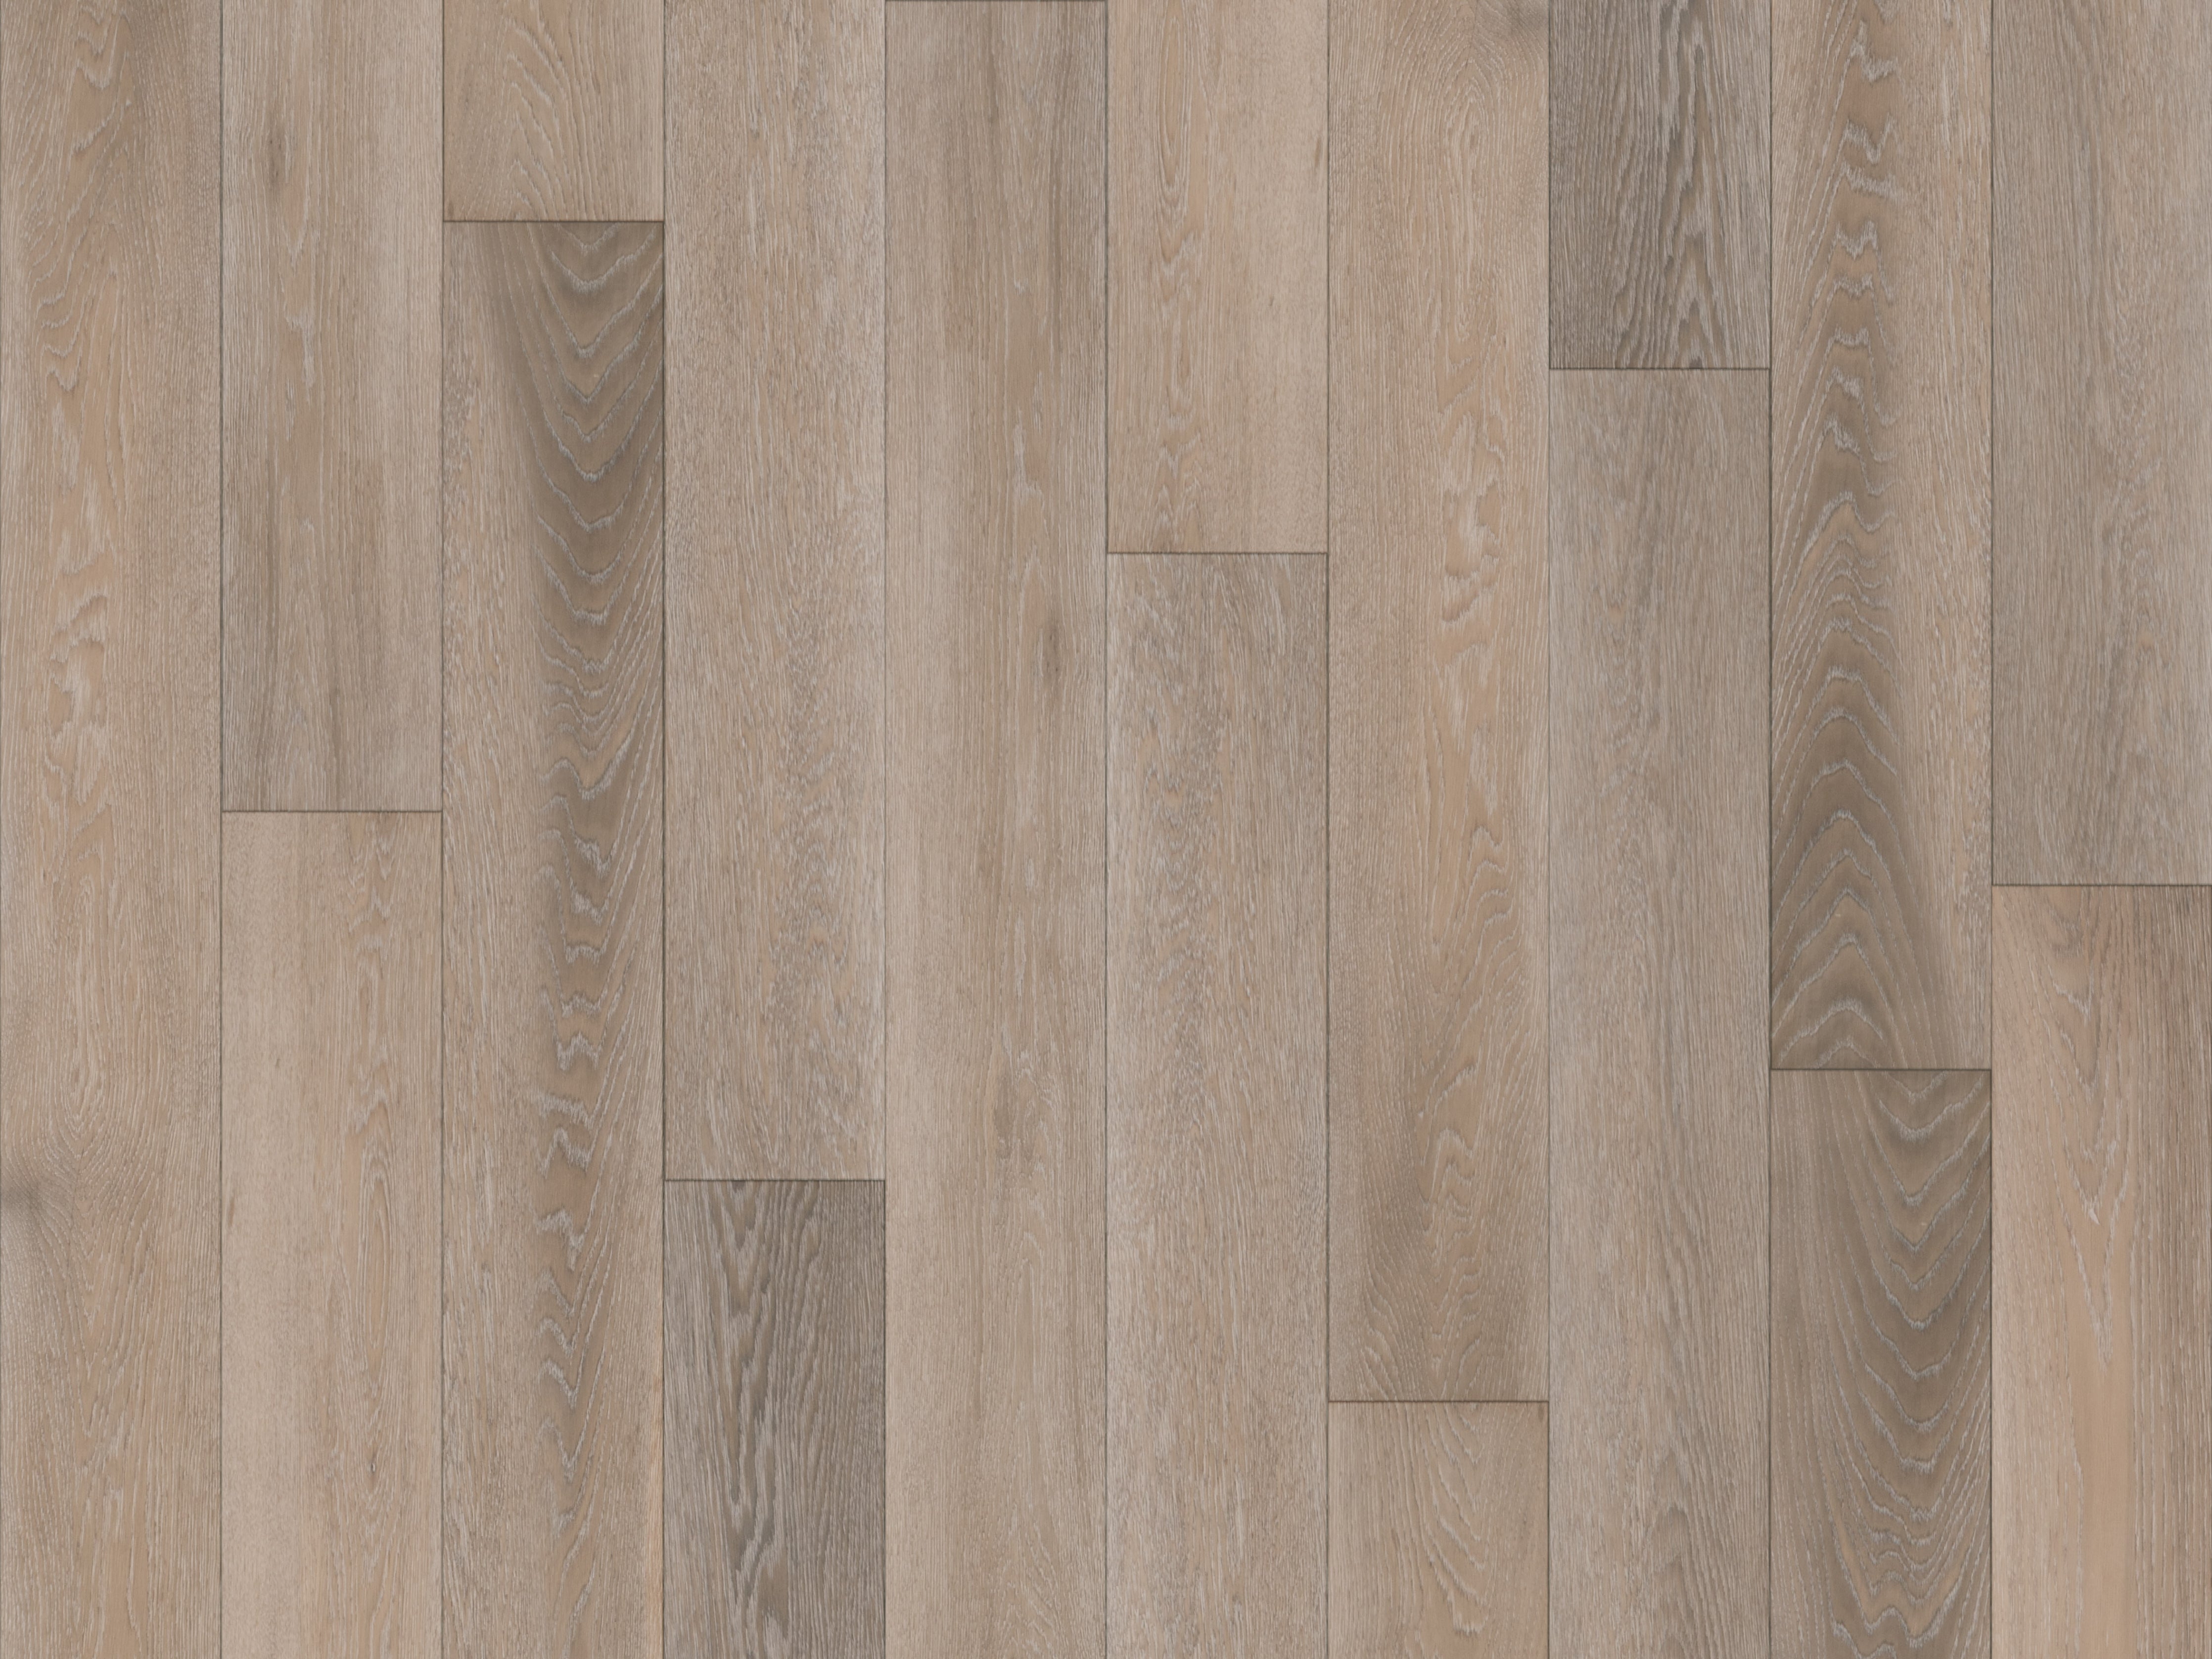 duchateau signature vernal lugano european oak engineered hardnatural wood floor uv oil finish for interior use distributed by surface group international